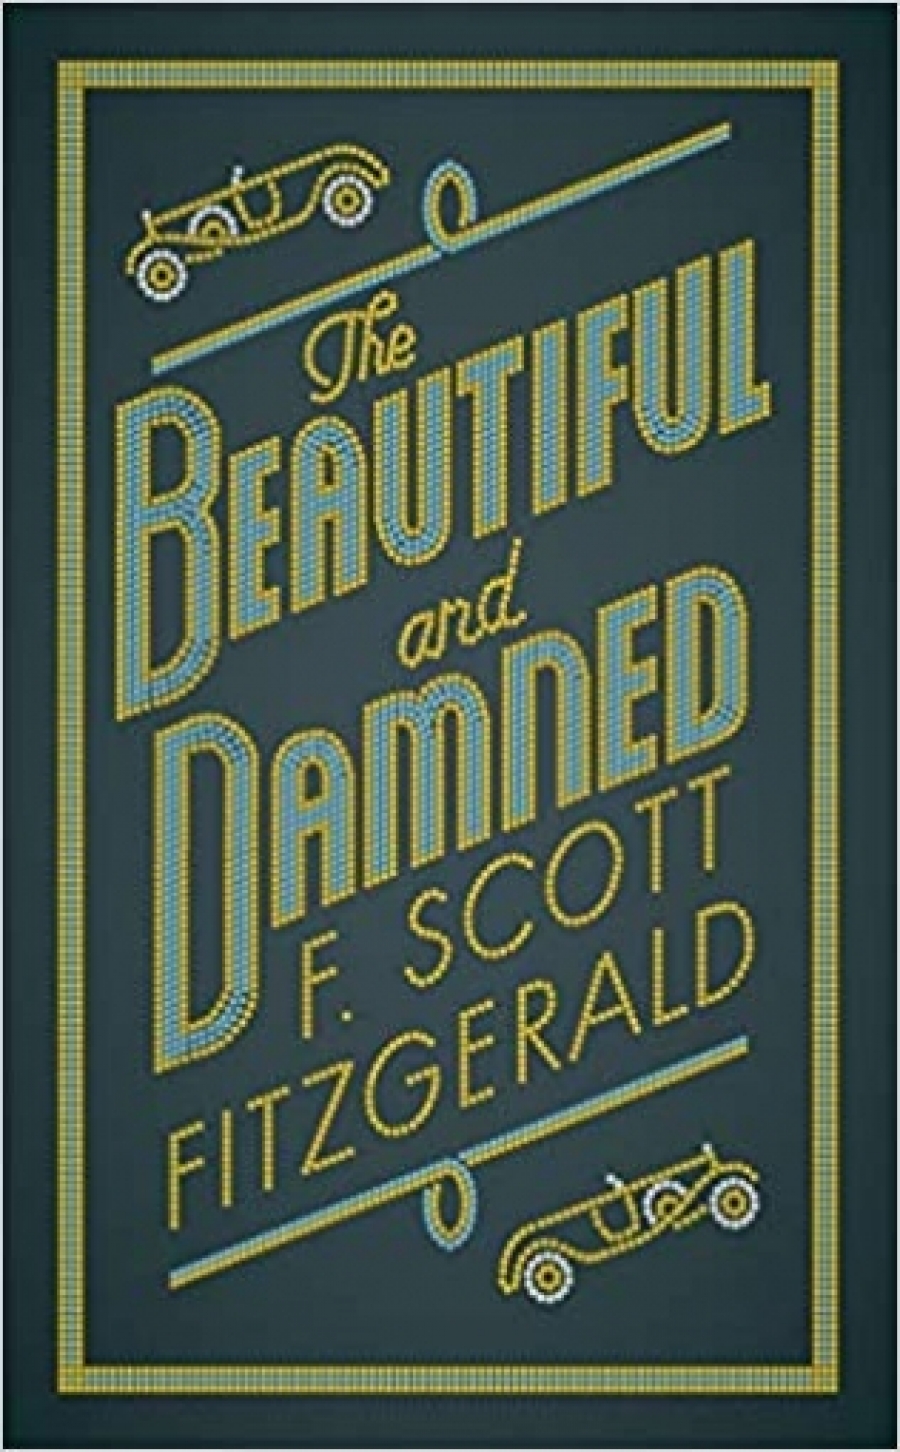 FitzGerald, Francis Scott The Beautiful and Damned 